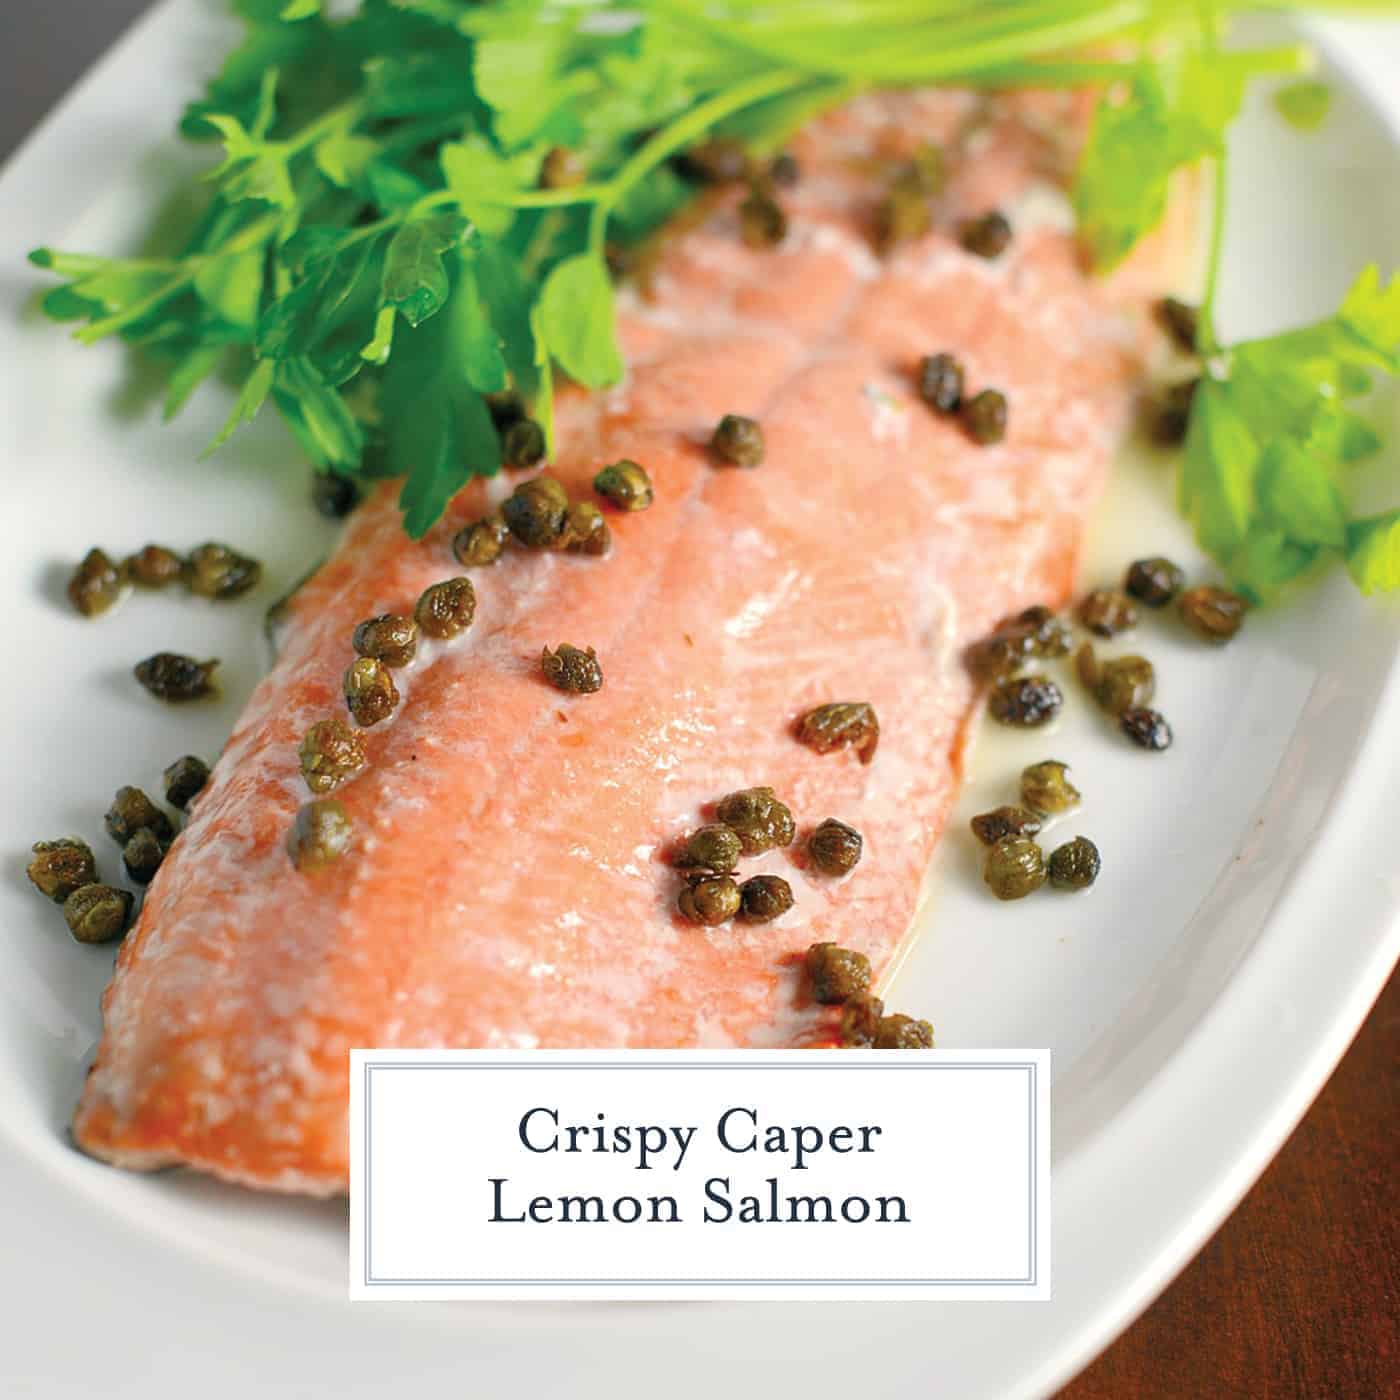 Crispy Caper Lemon Salmon is one of the best healthy salmon recipes. This lemon salmon is quick, easy and healthy! Crispy capers add texture sophistication to this easy weeknight meal. #bakedsalmon www.savoryexperiments.com 